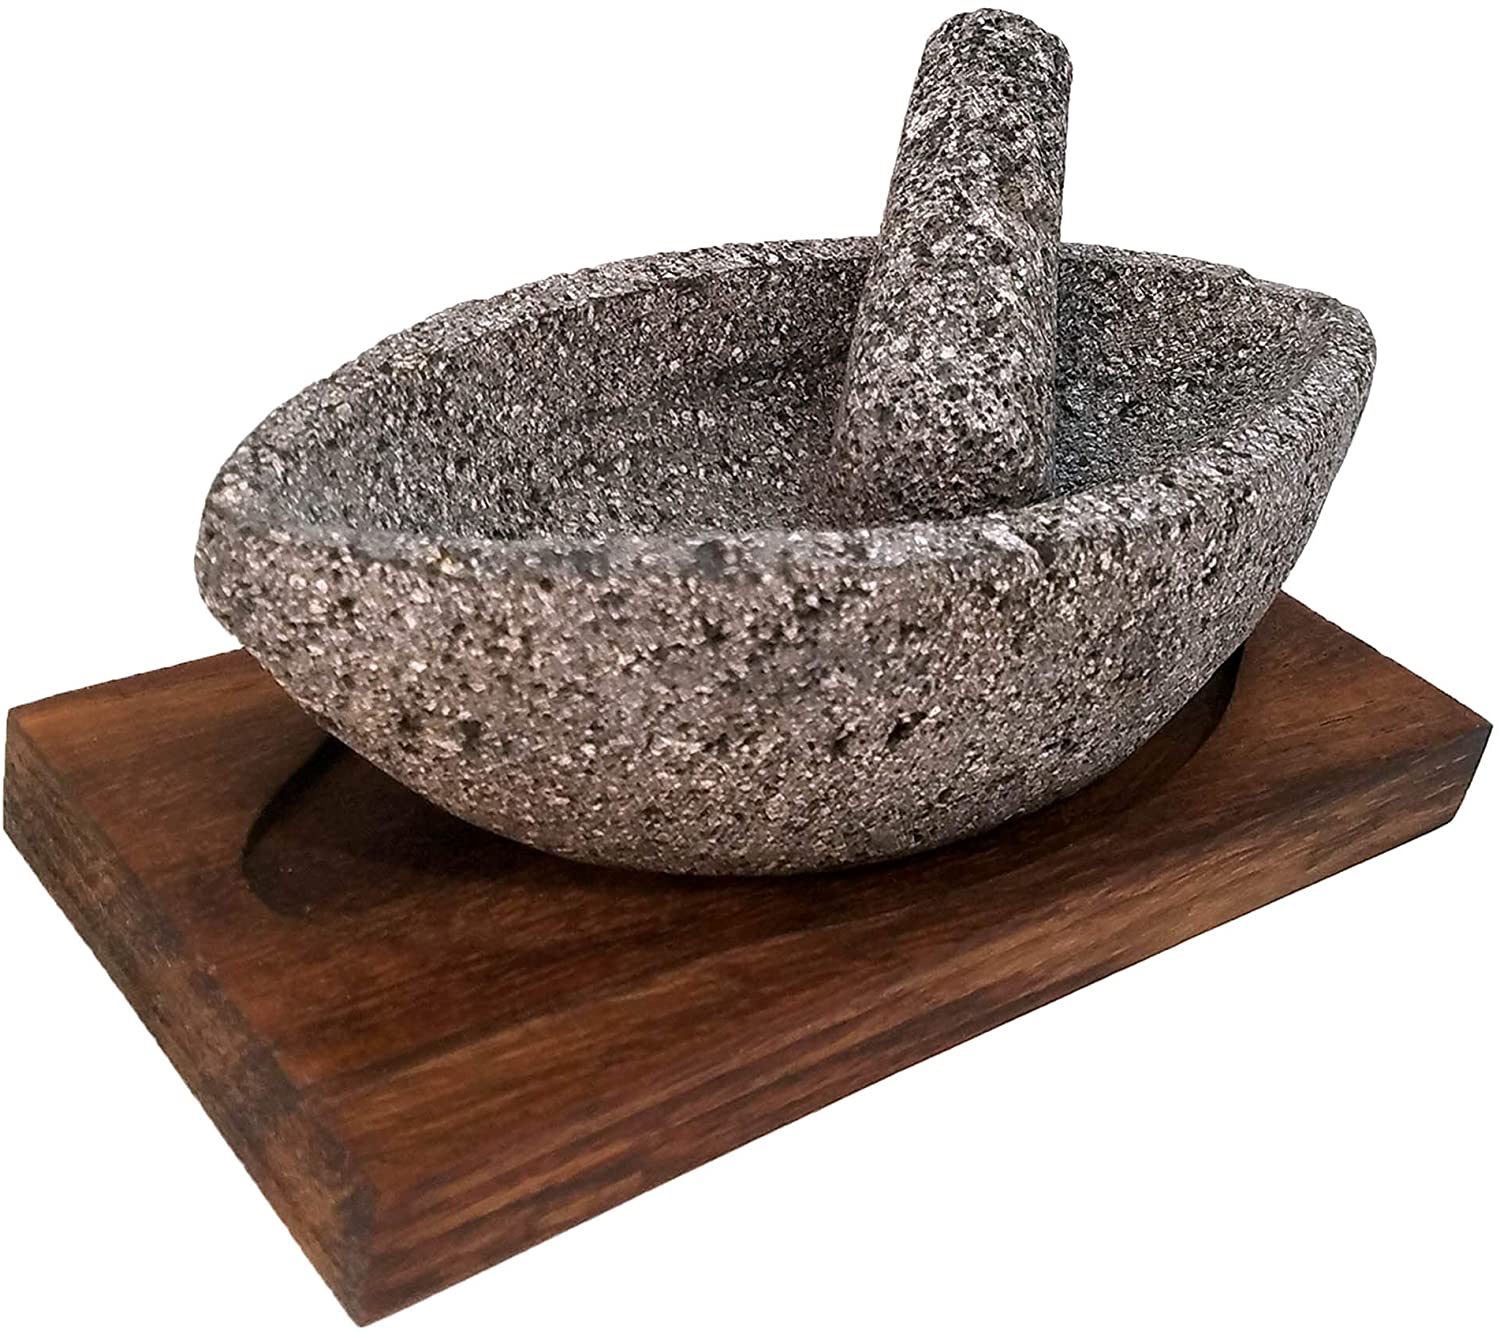 VOLCANIC ROCK PRODUCTS / Canoe Shaped Mortar and Pestle Set with Parota Wood Serving Board